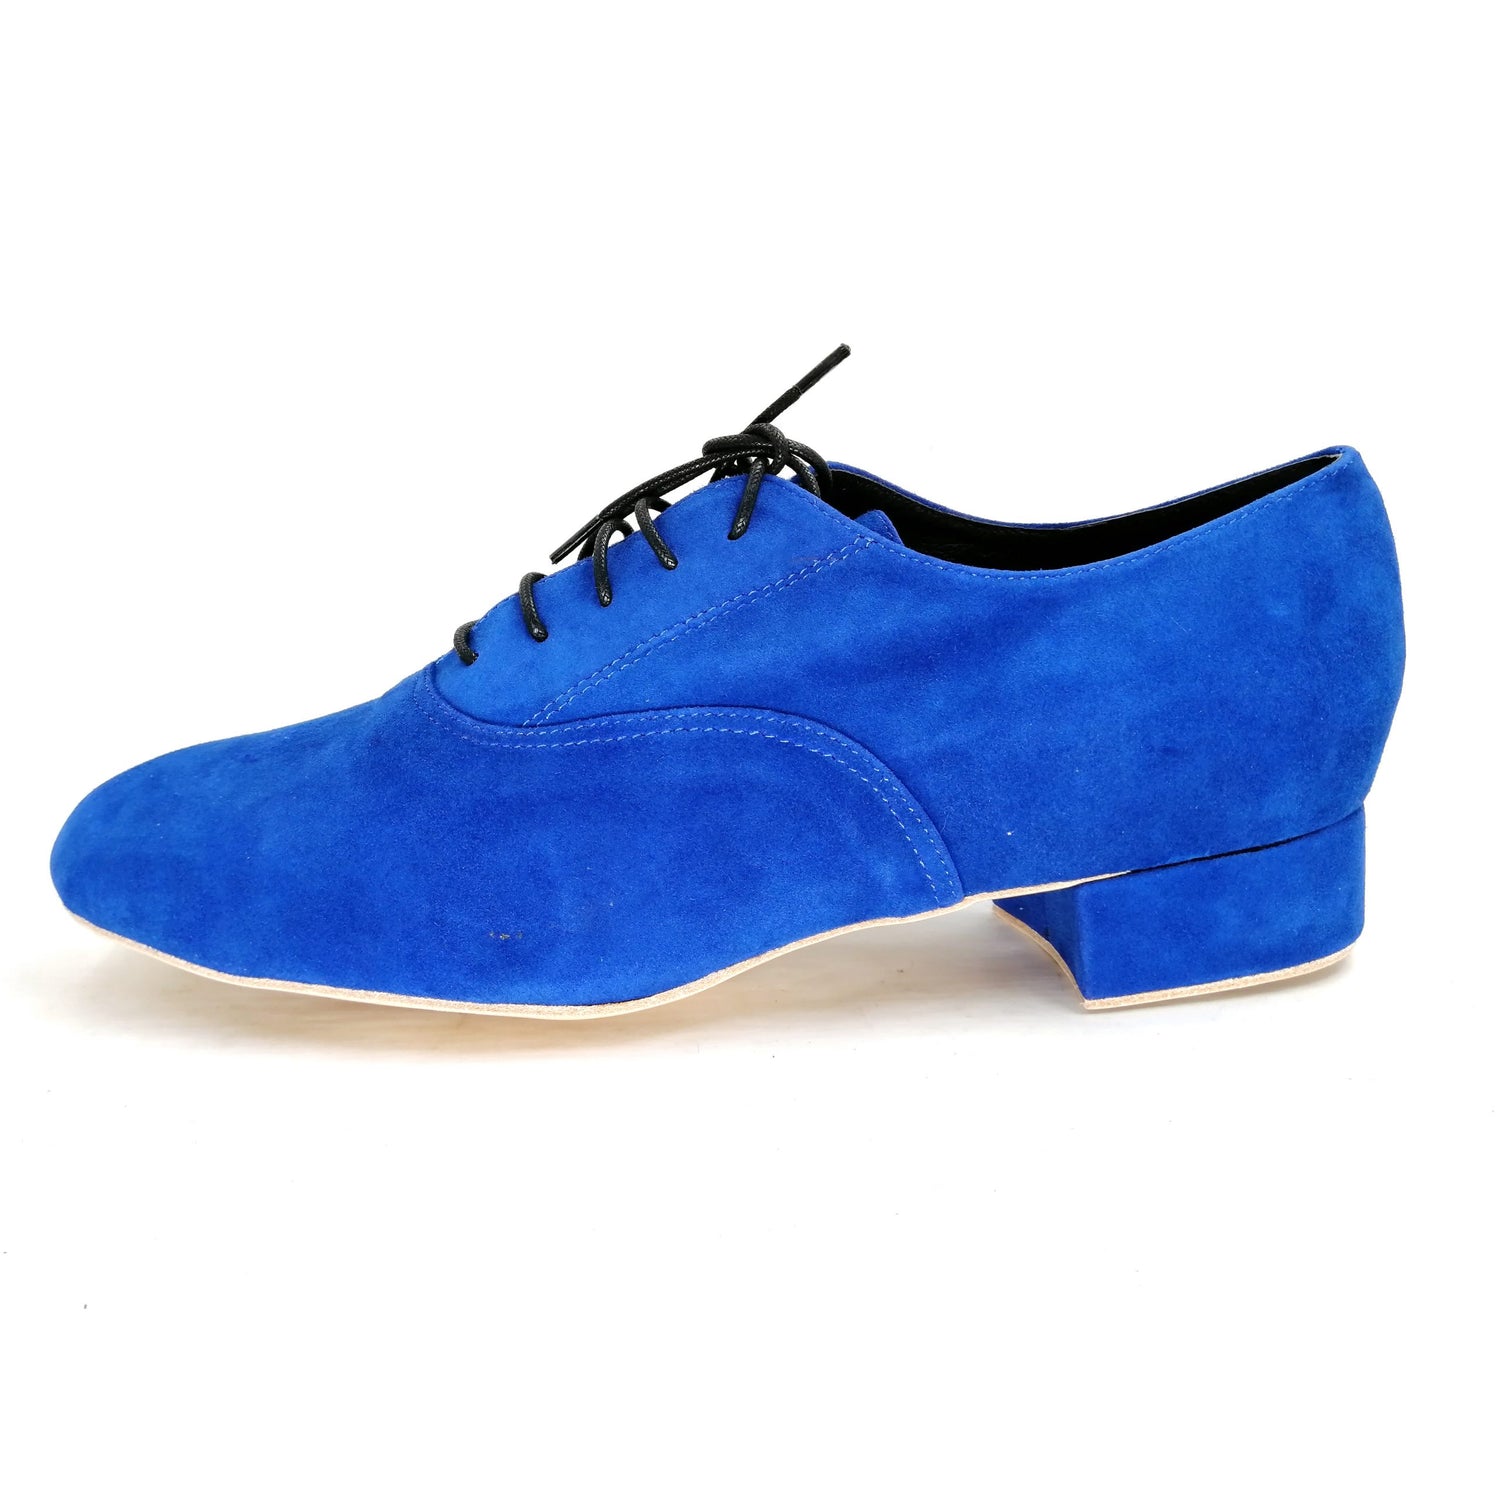 Men's Pro Dancer blue leather tango shoes with 1 inch heel PD1002A5